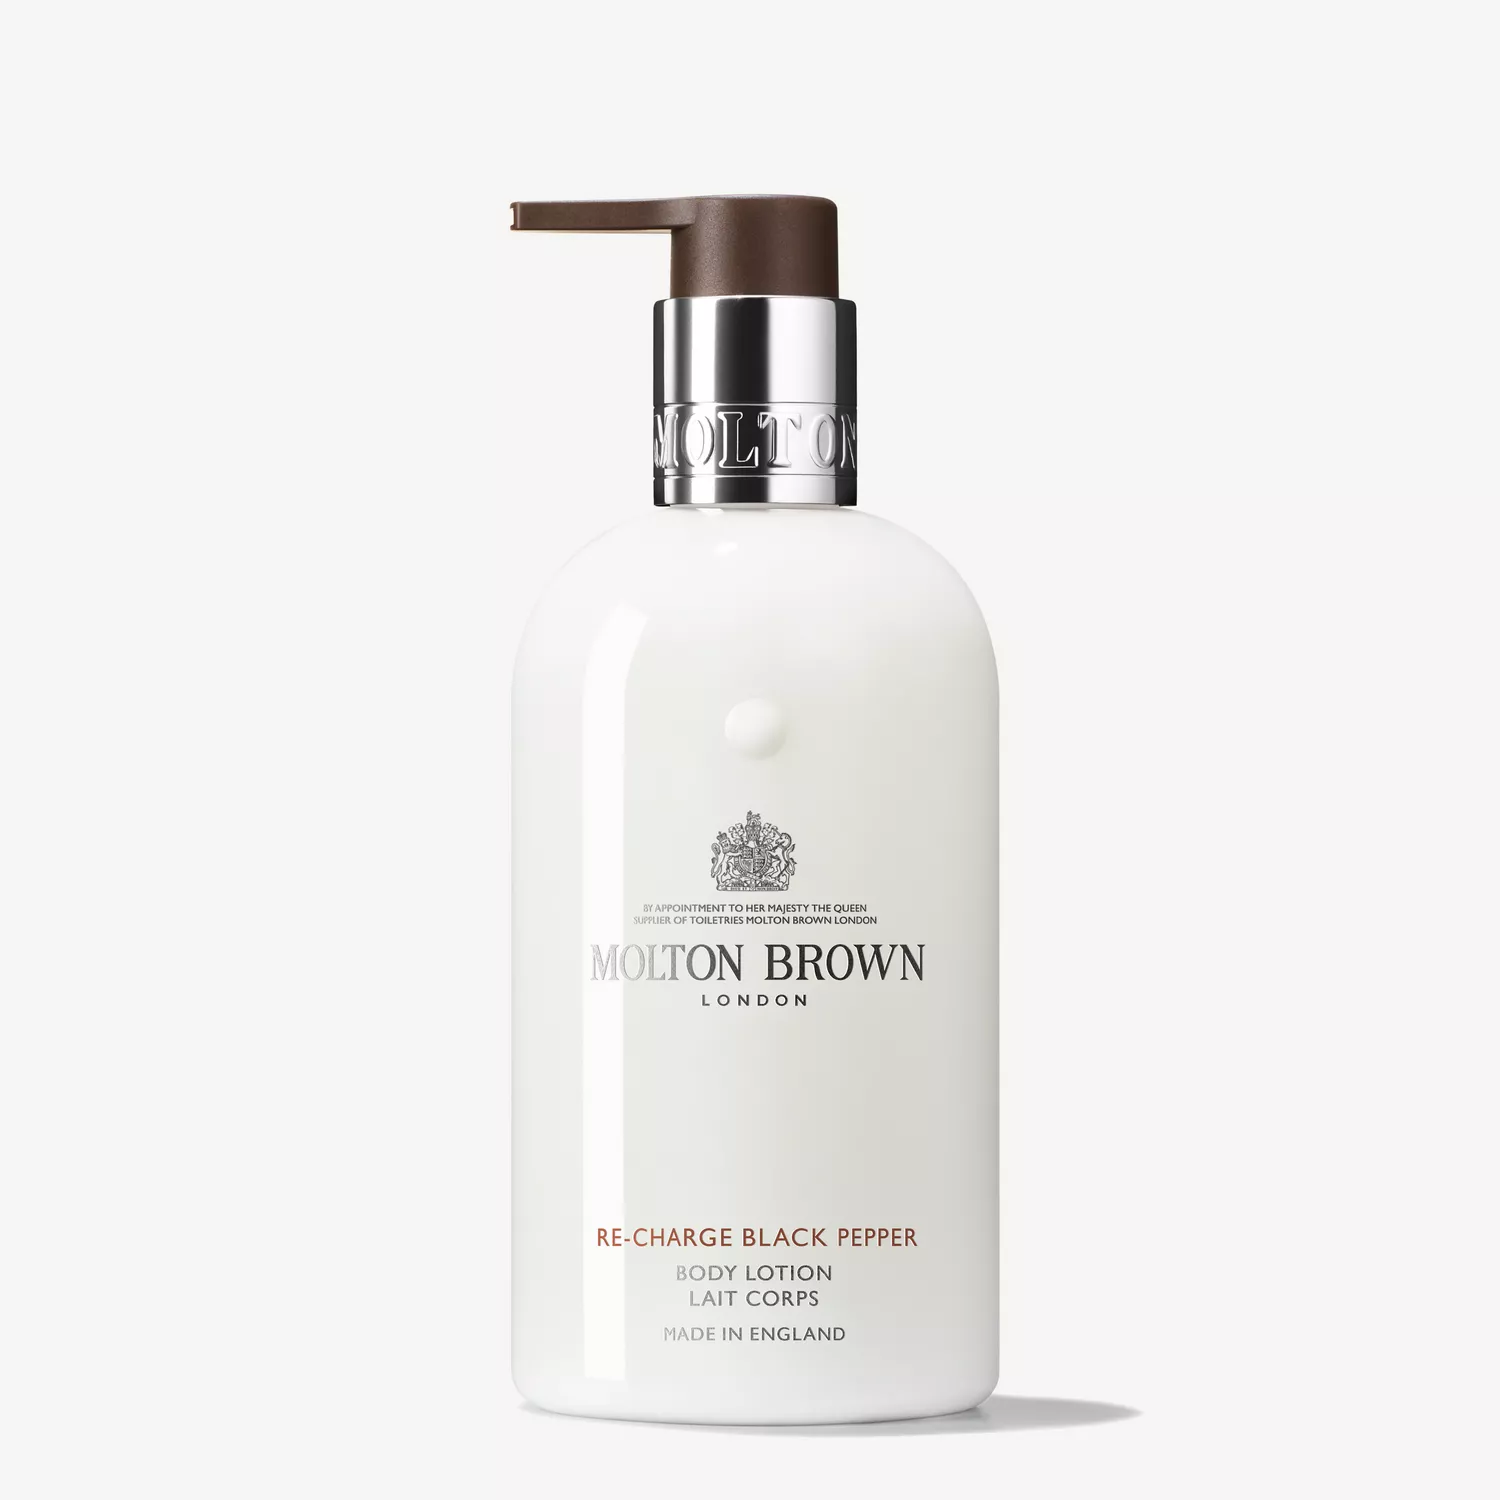 RE-CHARGE BLACK PEPPER BODY LOTION